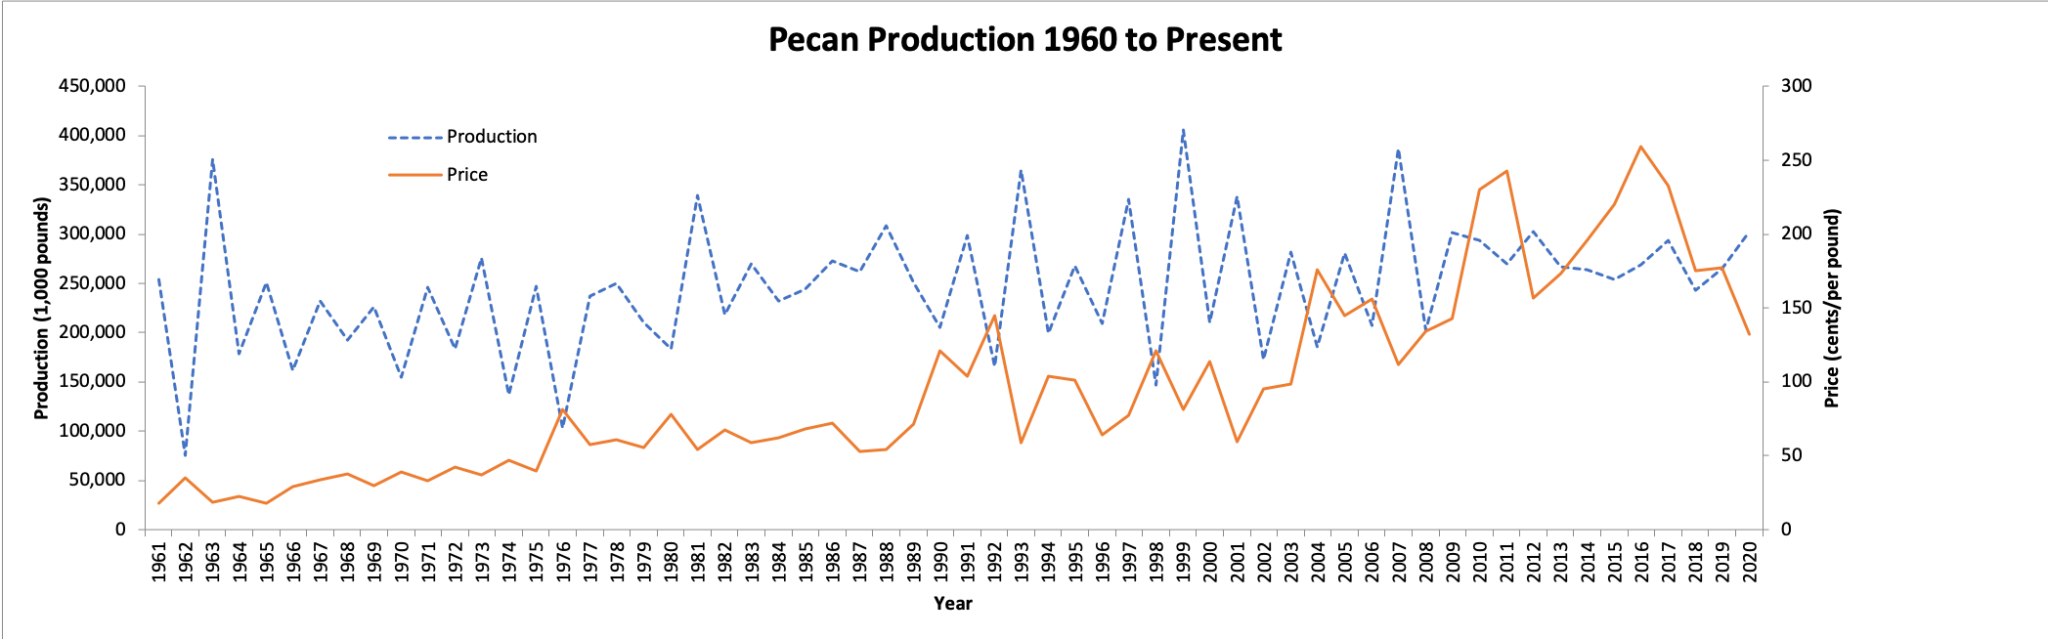 Market timing your pecan production? A questionable decision. Pecan